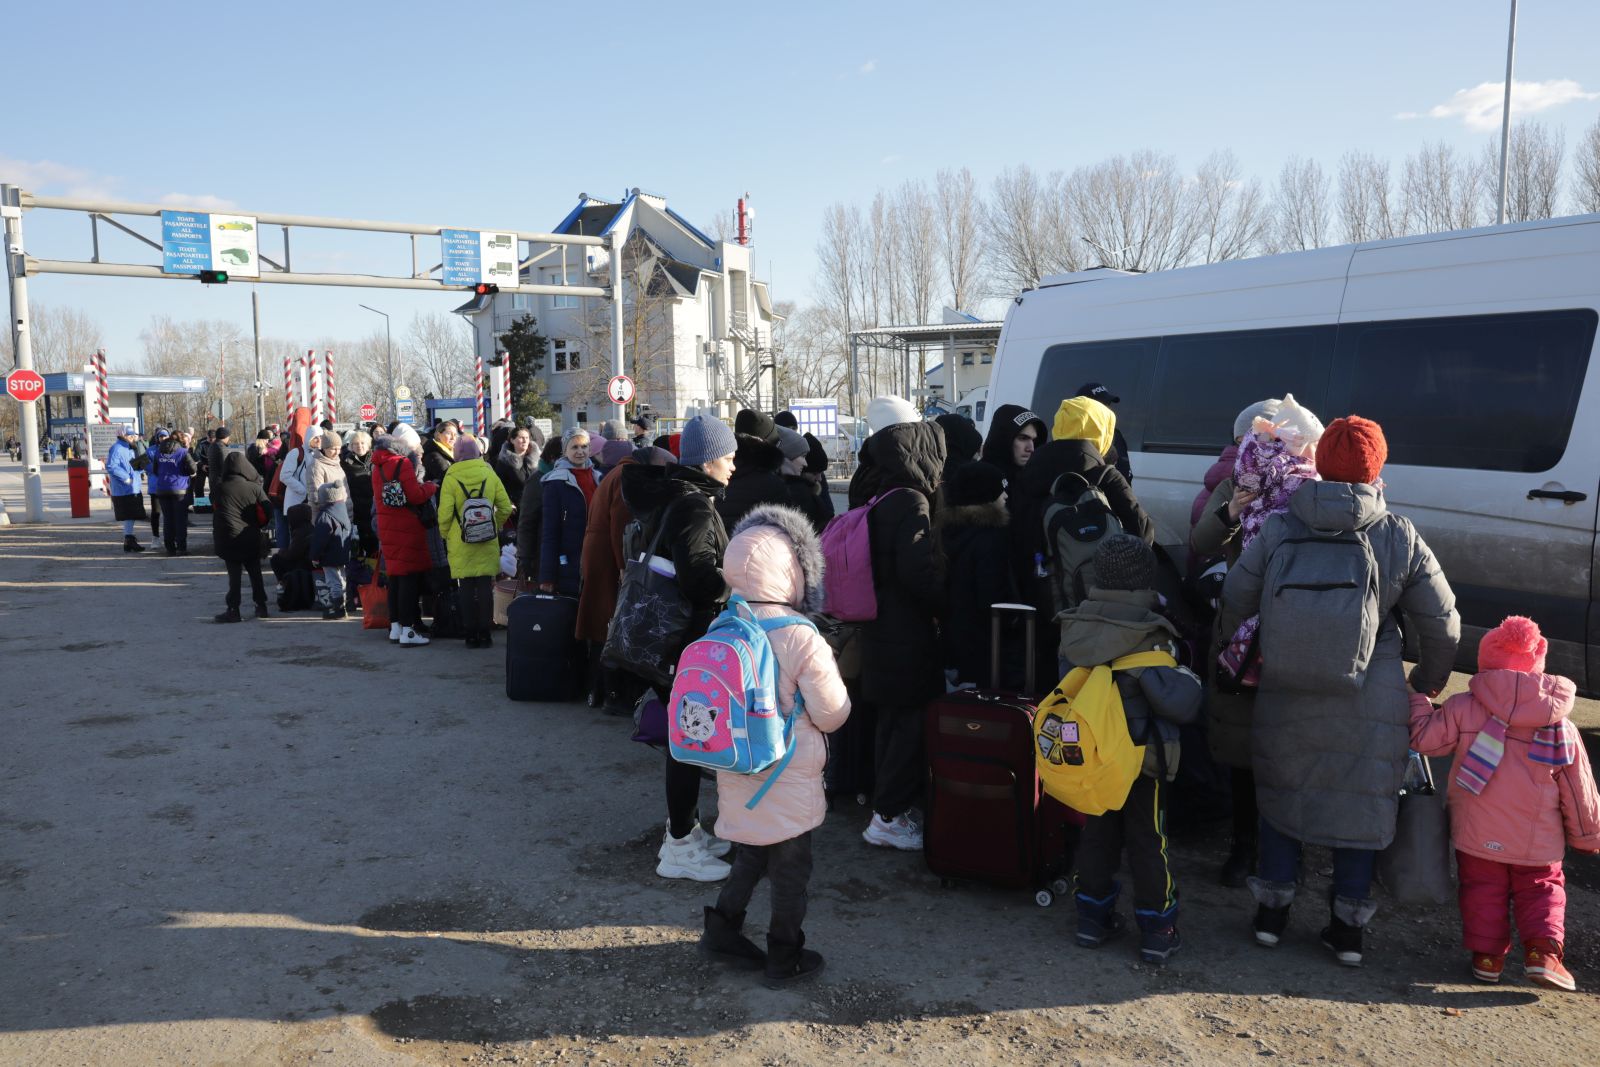 epa09819711 Ukrainians fleeing the conflict prepare to board a minibus at the border crossing between Ukraine and Moldova, at Palanca, Moldova, 12 March 2022. The Minibus takes them to a reception center nearby where they can get a warm drink then take a bus for Romania, Poland, Germany or the capital city Chisinau. Sixteen days into the Russian invasion of Ukraine the numbers of refugees fleeing the conflict to neighboring countries continues to be high with more than 2 million going to Poland, Slovakia, Romania and Moldova then to other EU countries for a number of them, according to the UNHCR. Moldova has so far seen some 300,000 refugees transiting to other EU countries, 84,000  of them staying in the country.  EPA/AMEL PAIN